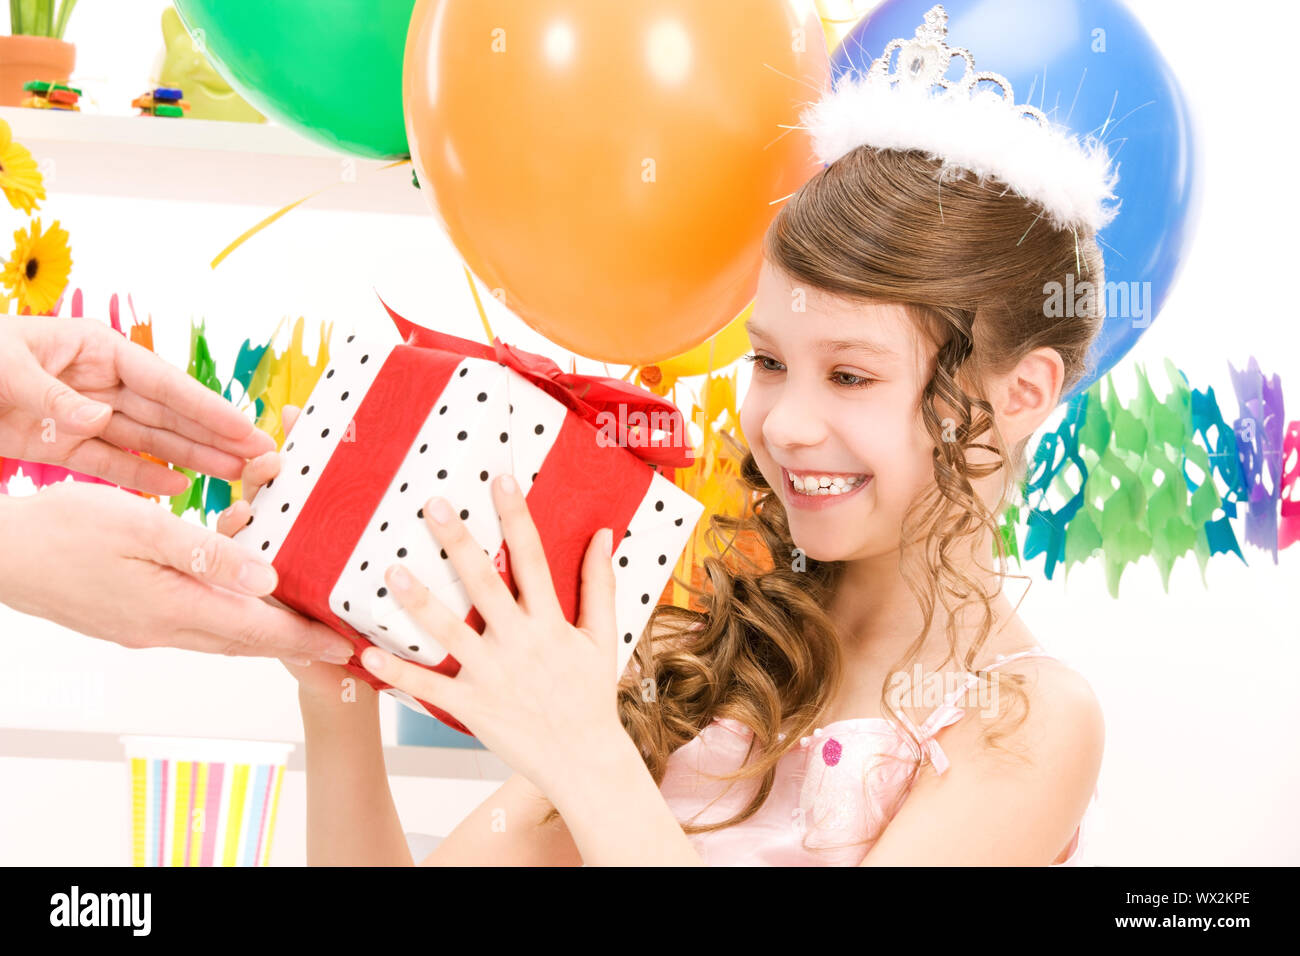 happy party girl with balloons and gift box Stock Photo - Alamy